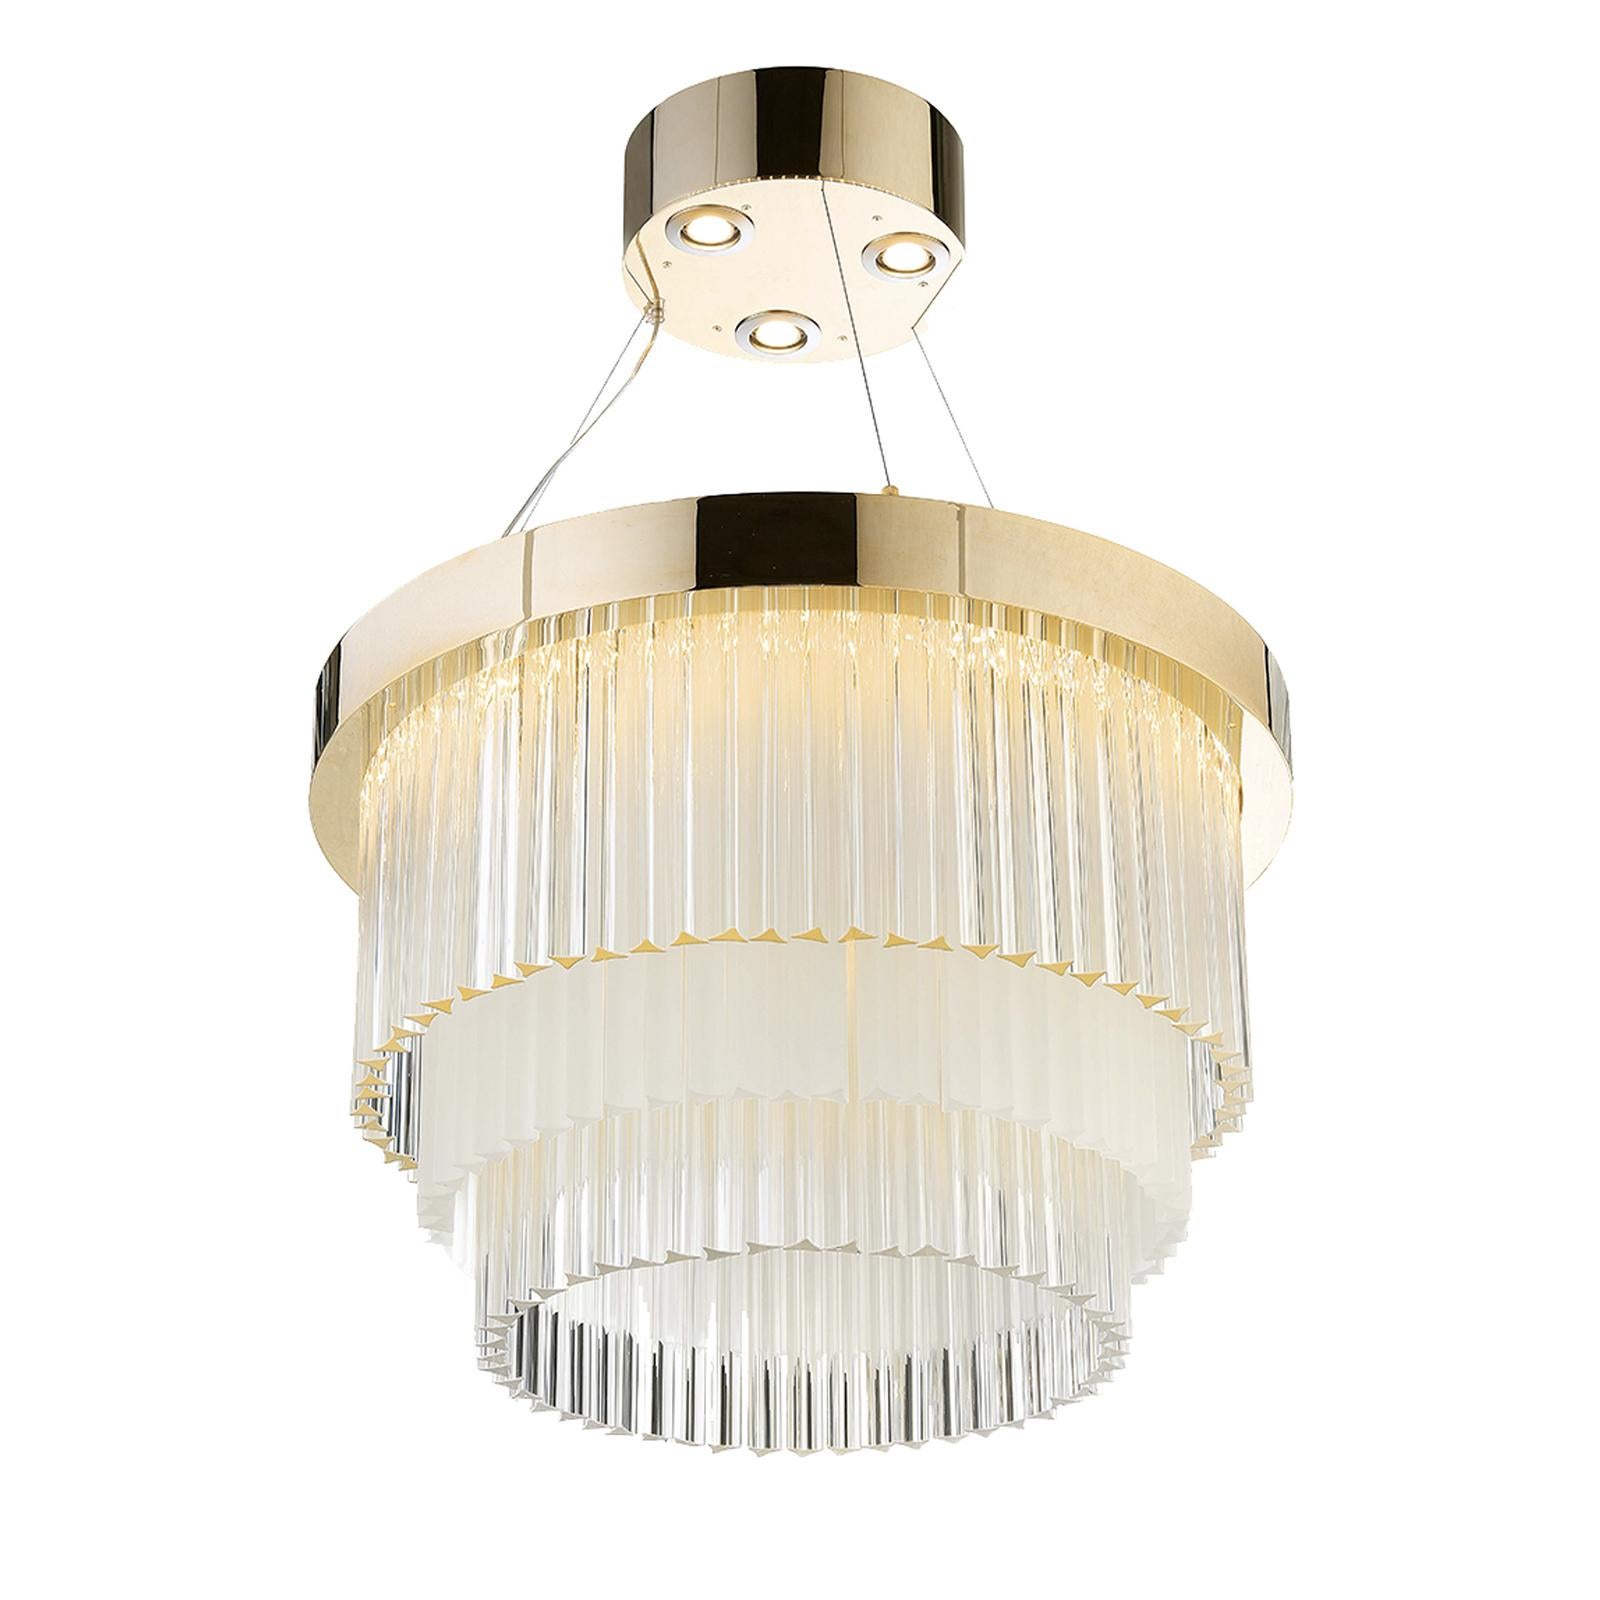 Part of the Ring collection, this superb, Art Deco, inspired chandelier will enrich the look of any room. Its round, metal structure is supported by a top piece with three GU10 LED lightbulbs connected to a central ring. From this ring element hang